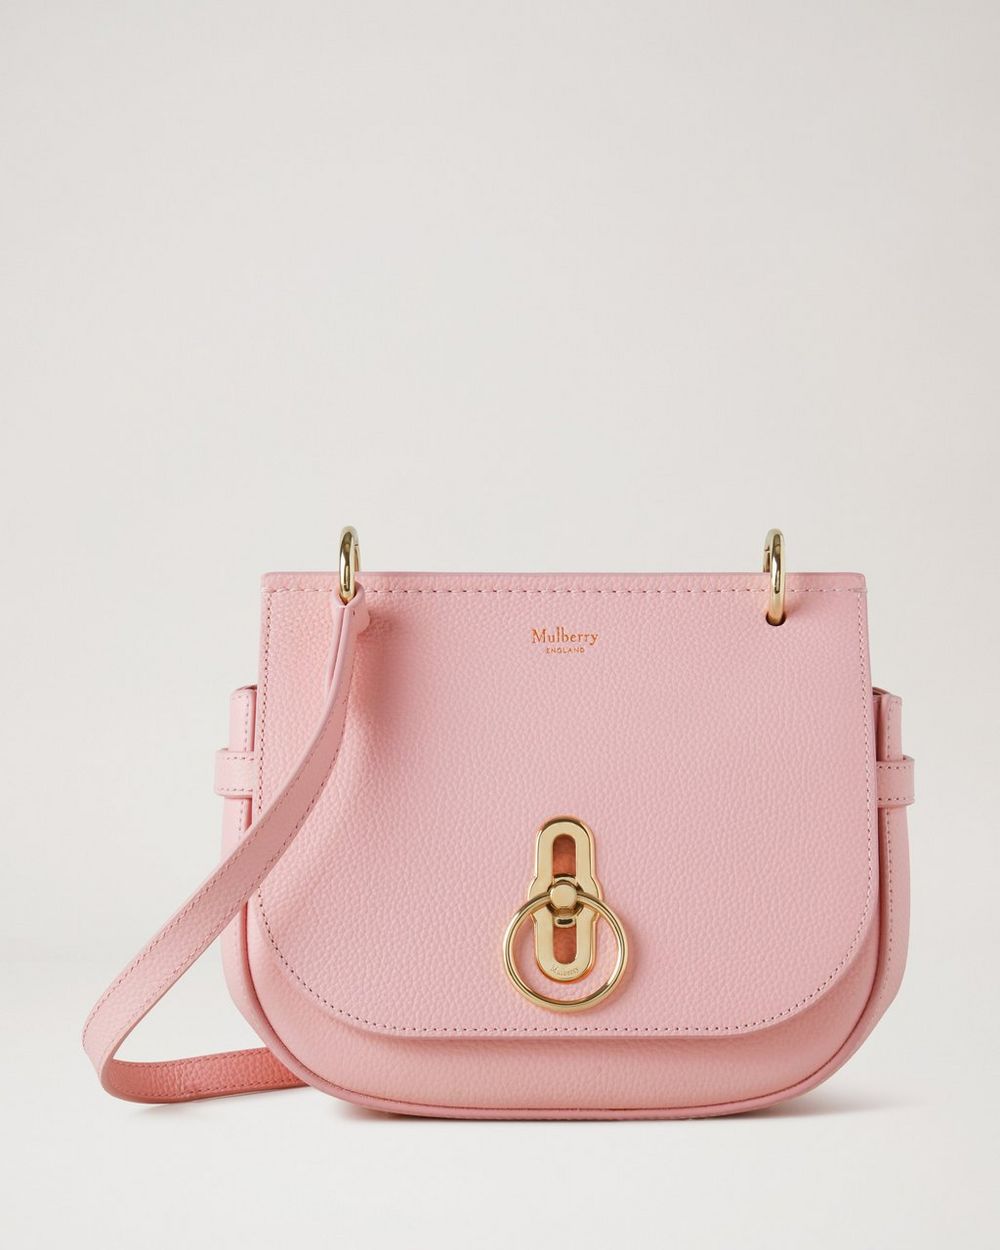 First Mulberry bag! Small Amberley Satchel in Powder Rose : r/handbags